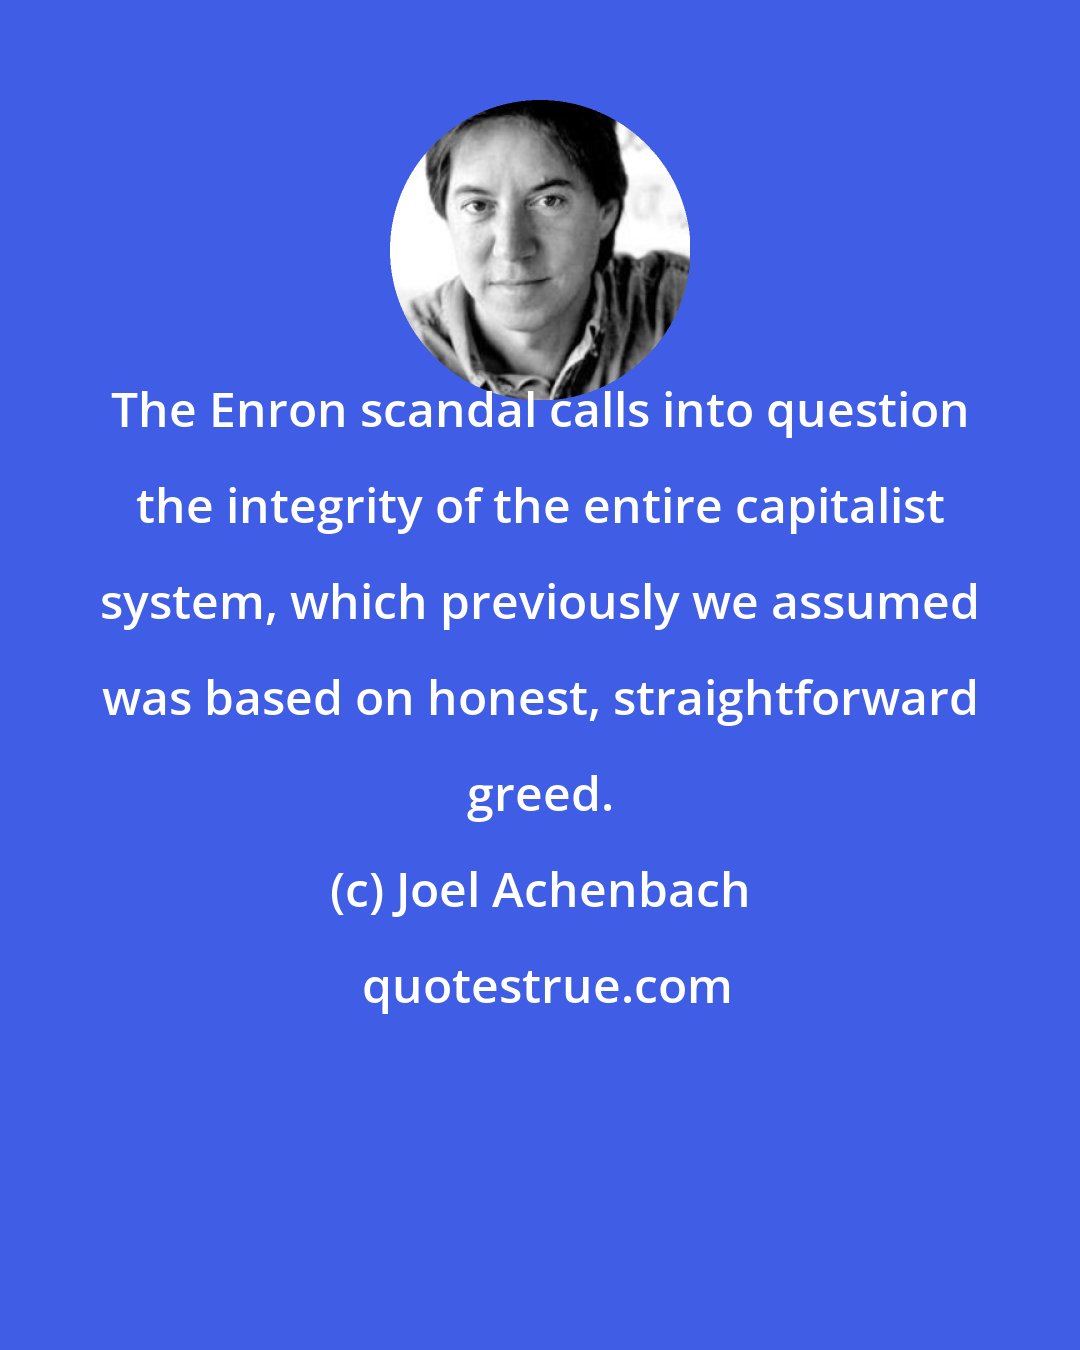 Joel Achenbach: The Enron scandal calls into question the integrity of the entire capitalist system, which previously we assumed was based on honest, straightforward greed.